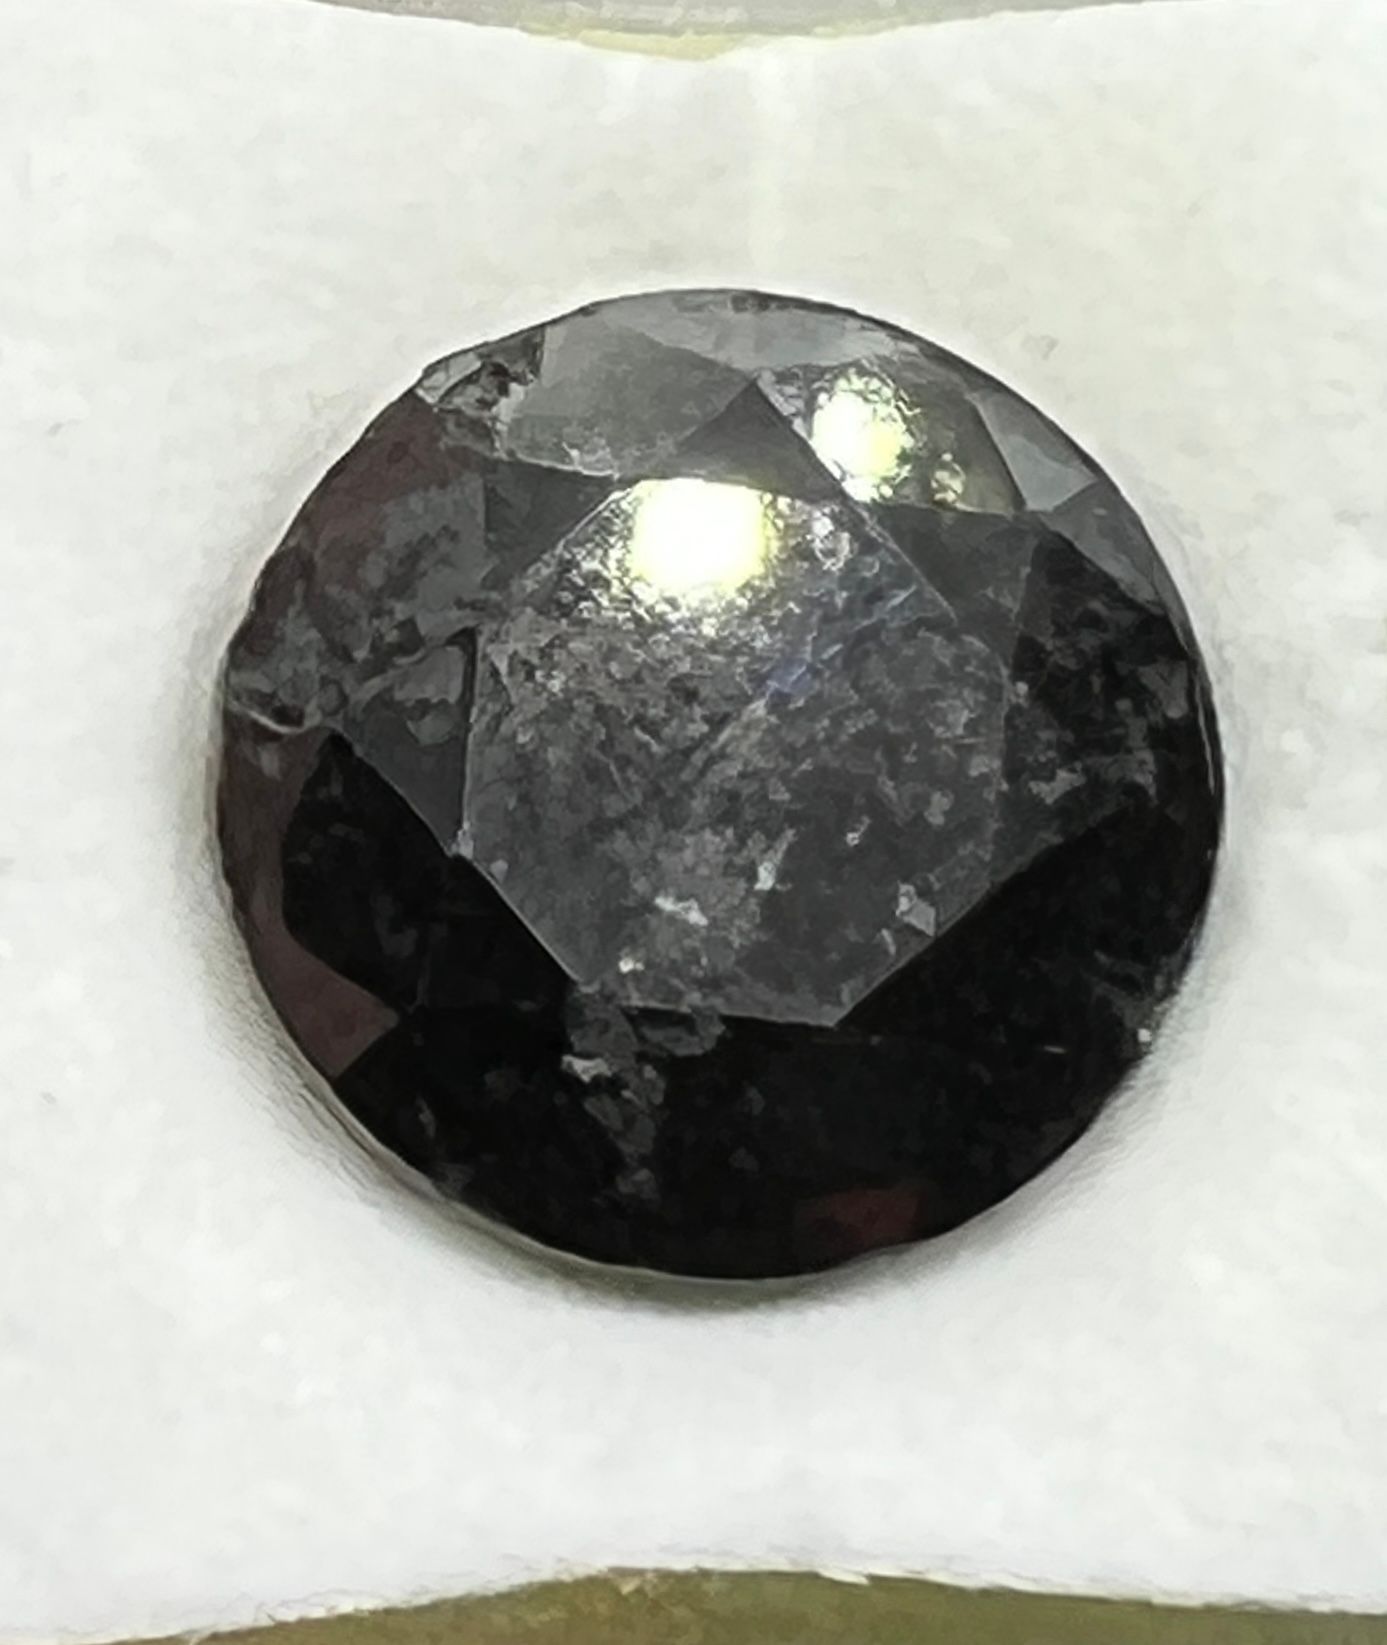 Diamant BLACK DIAMOND of 12.81 carats with AIGT certificate of guarantee